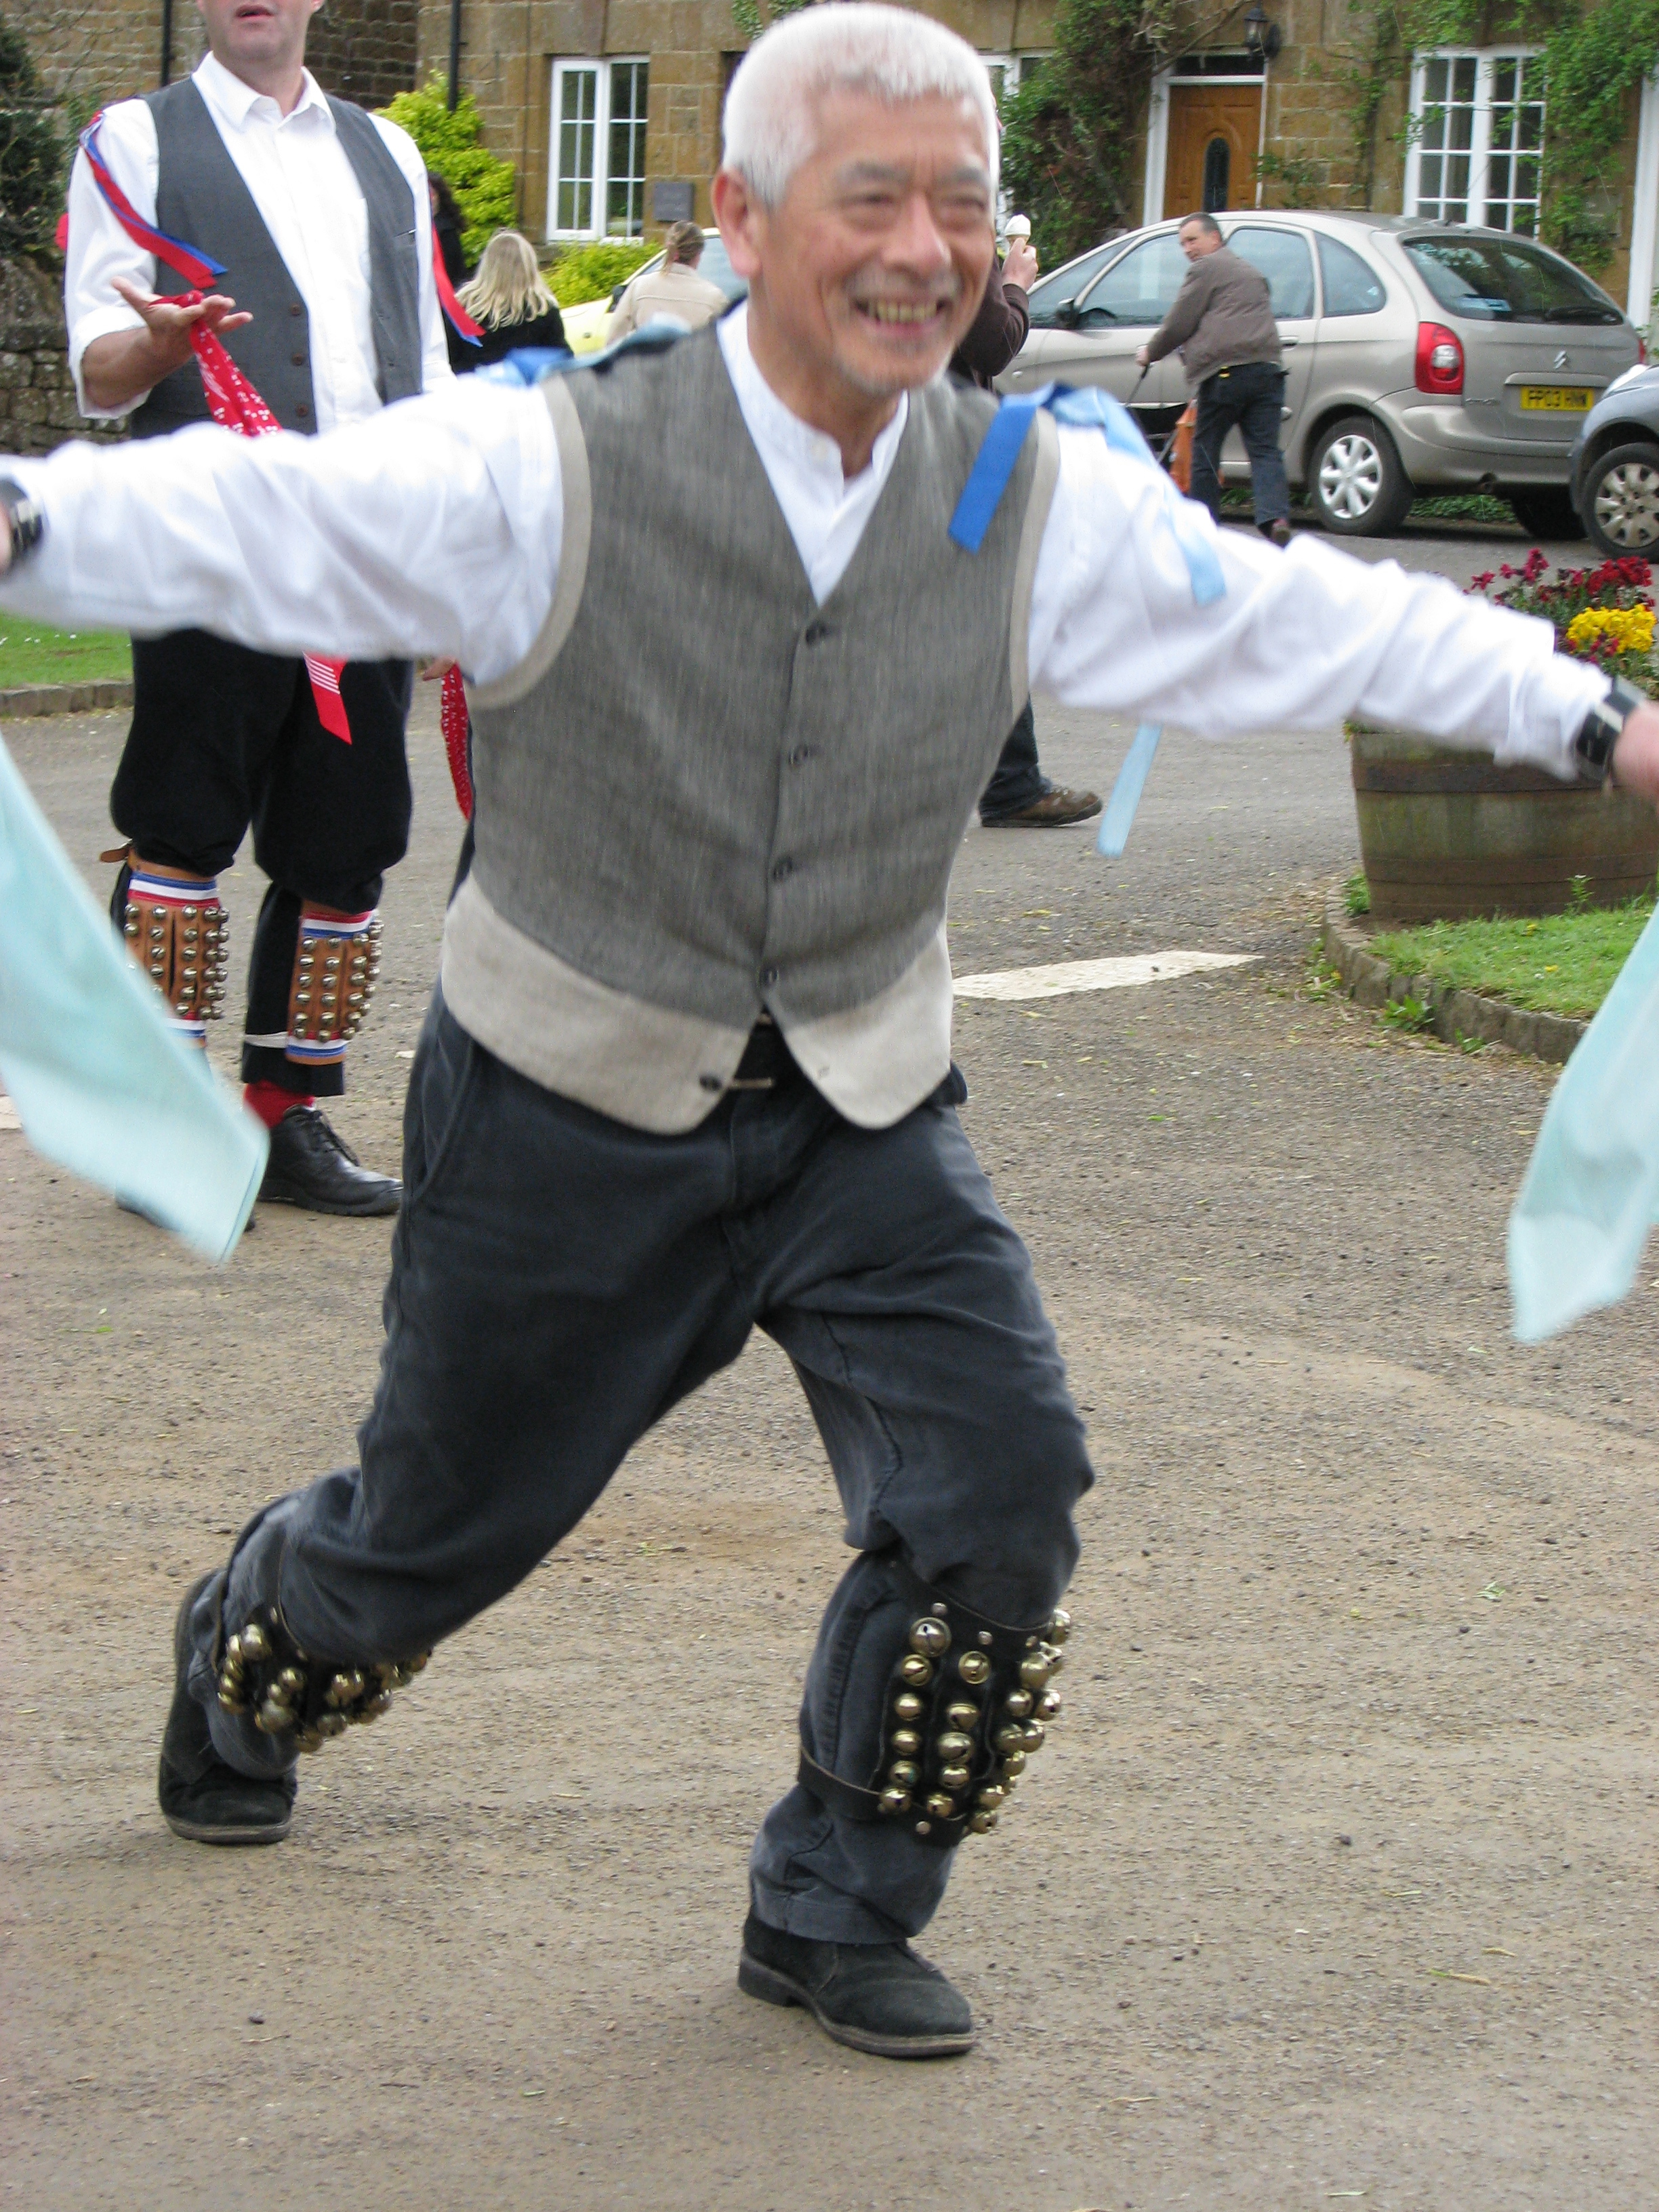 Togo is the first Japanese Morris Dancer in the UK!